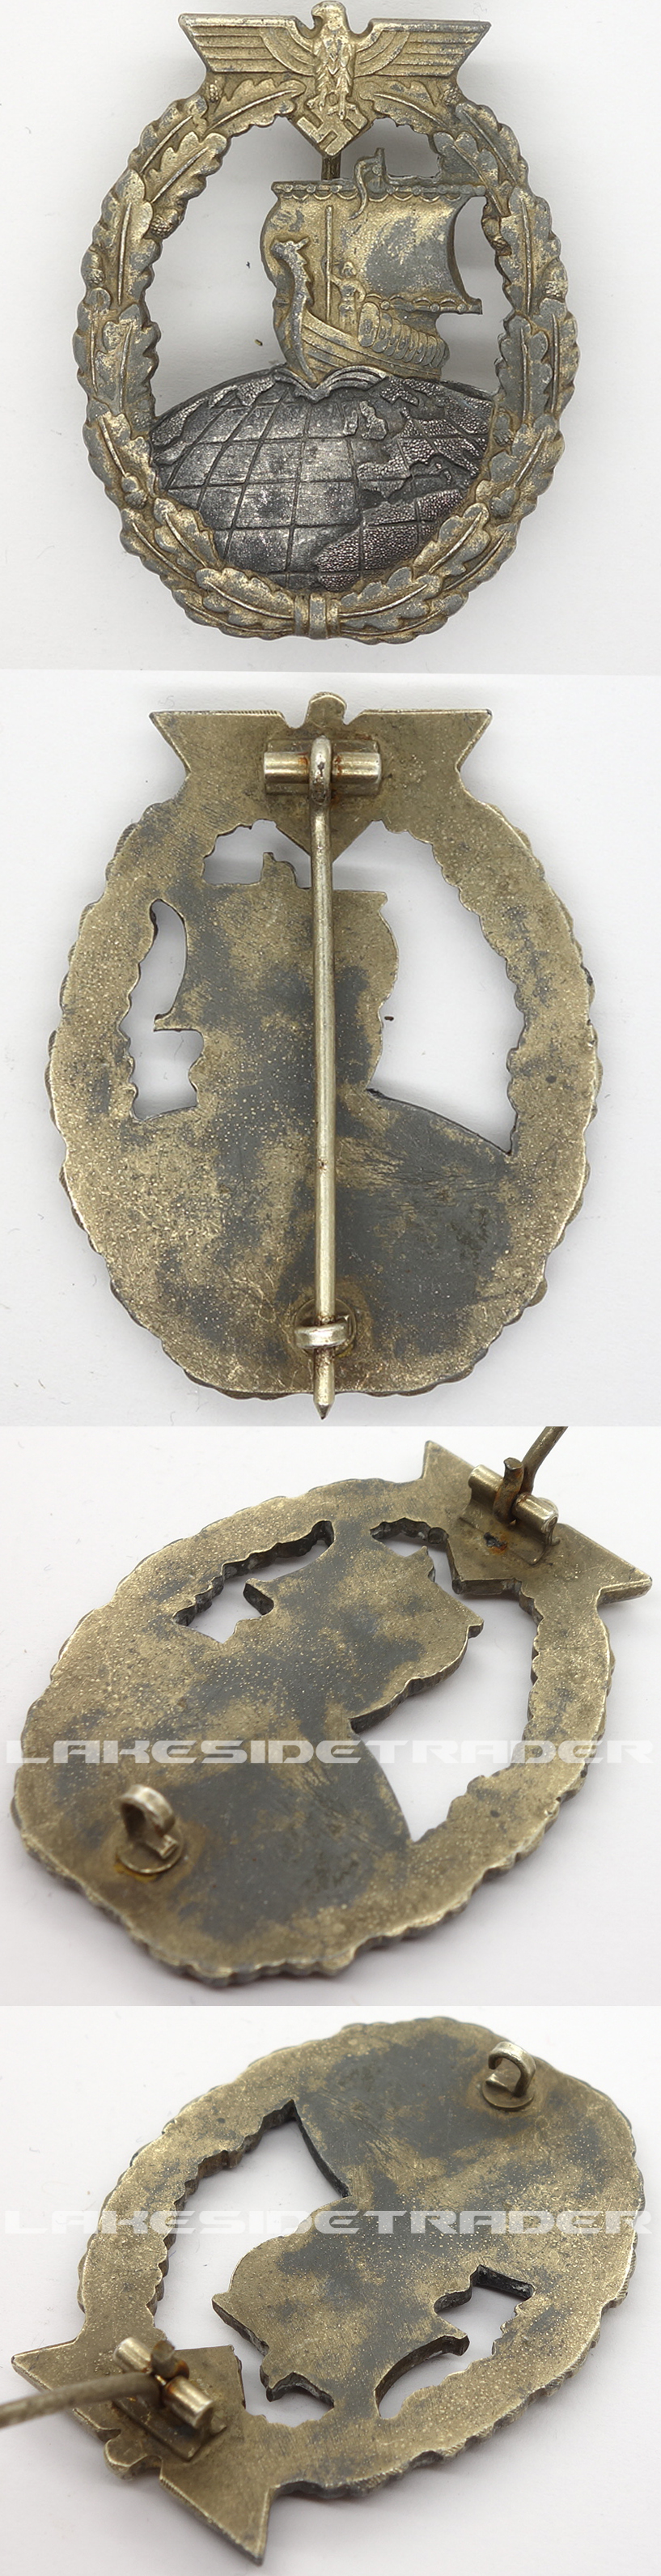 Auxiliary Cruiser War Badge by F. Orth